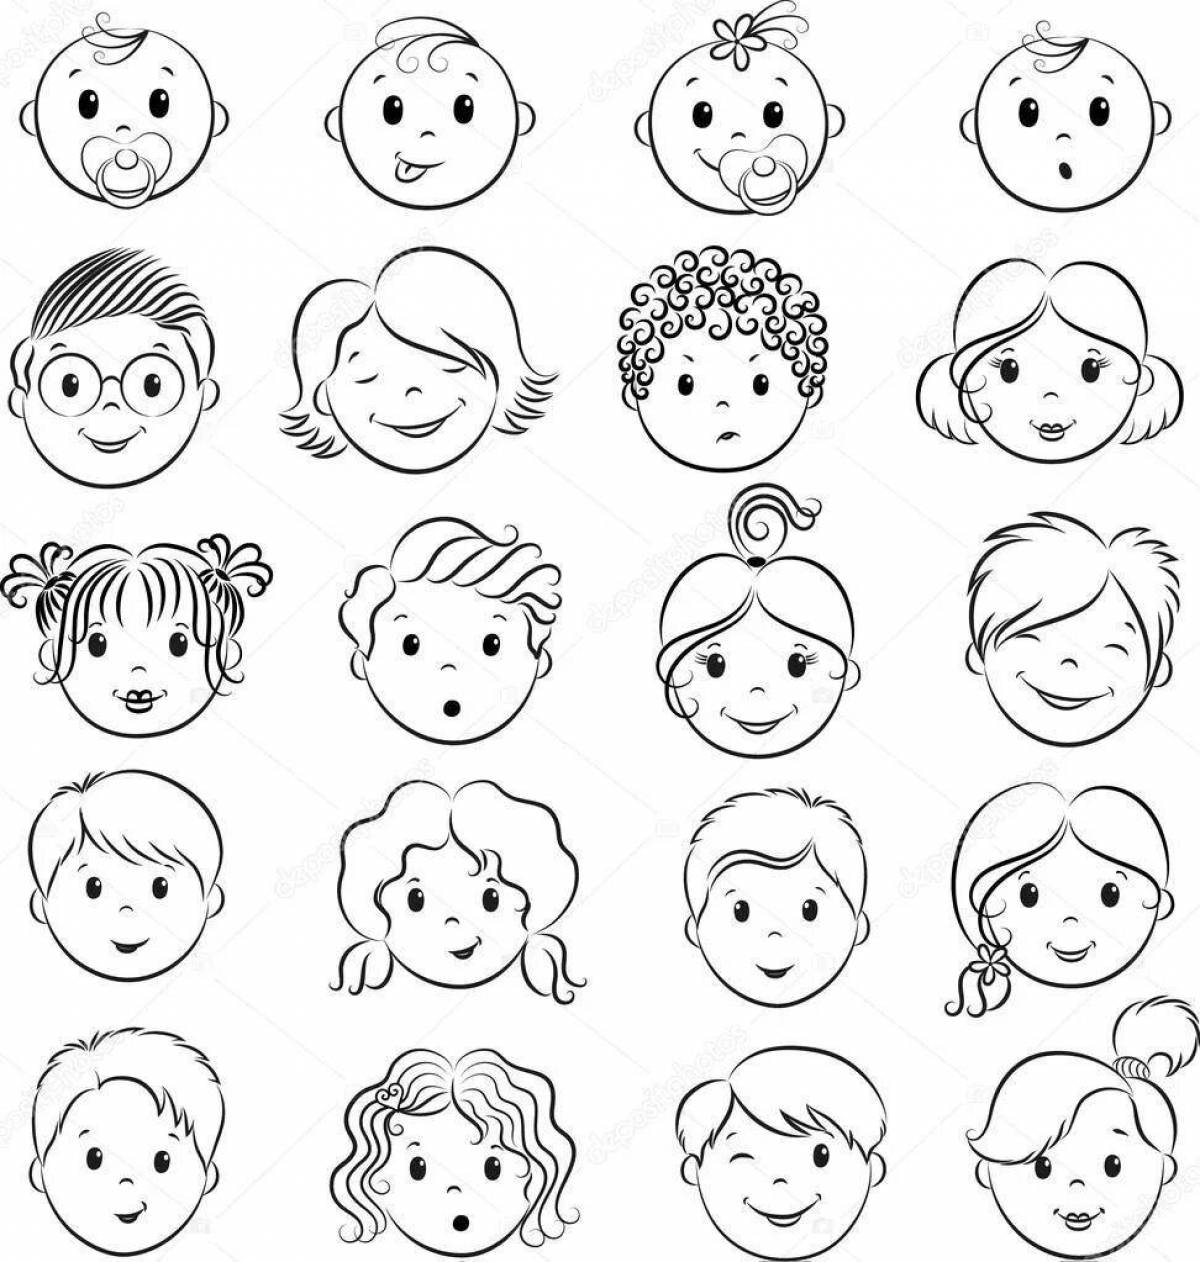 Proud coloring of emotions and feelings for children